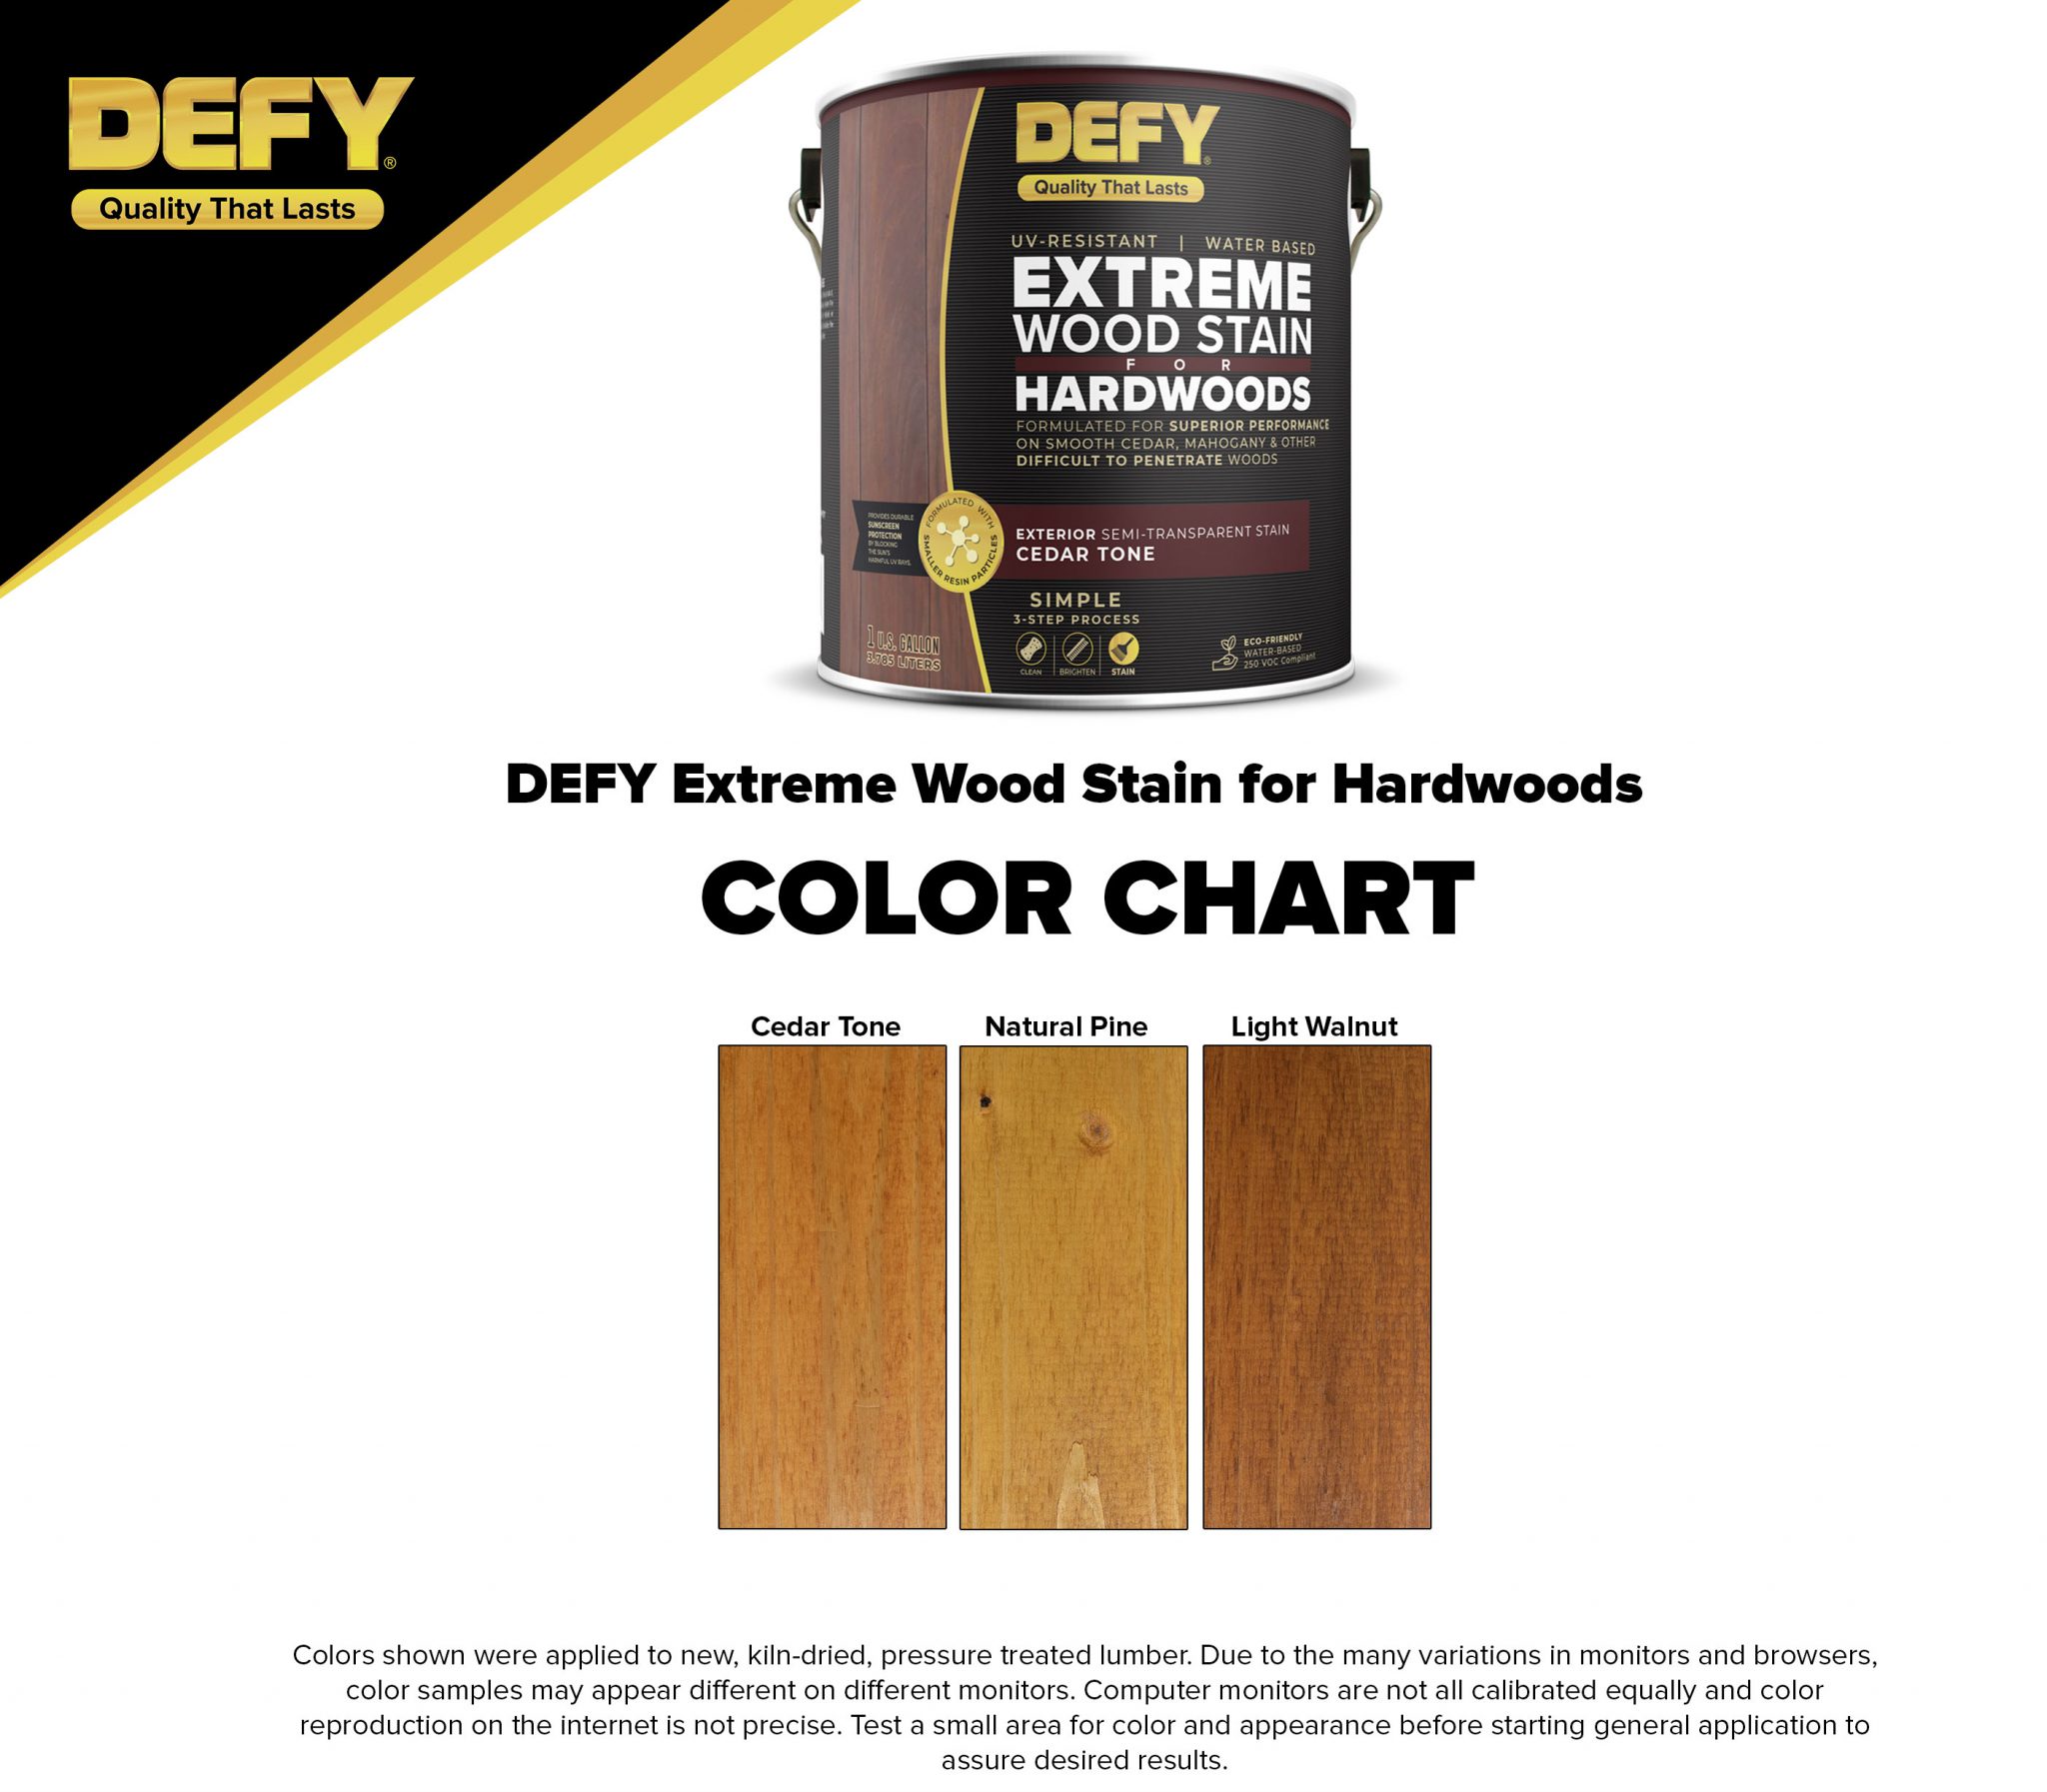 Defy-Hardwood-Stain-Colors2